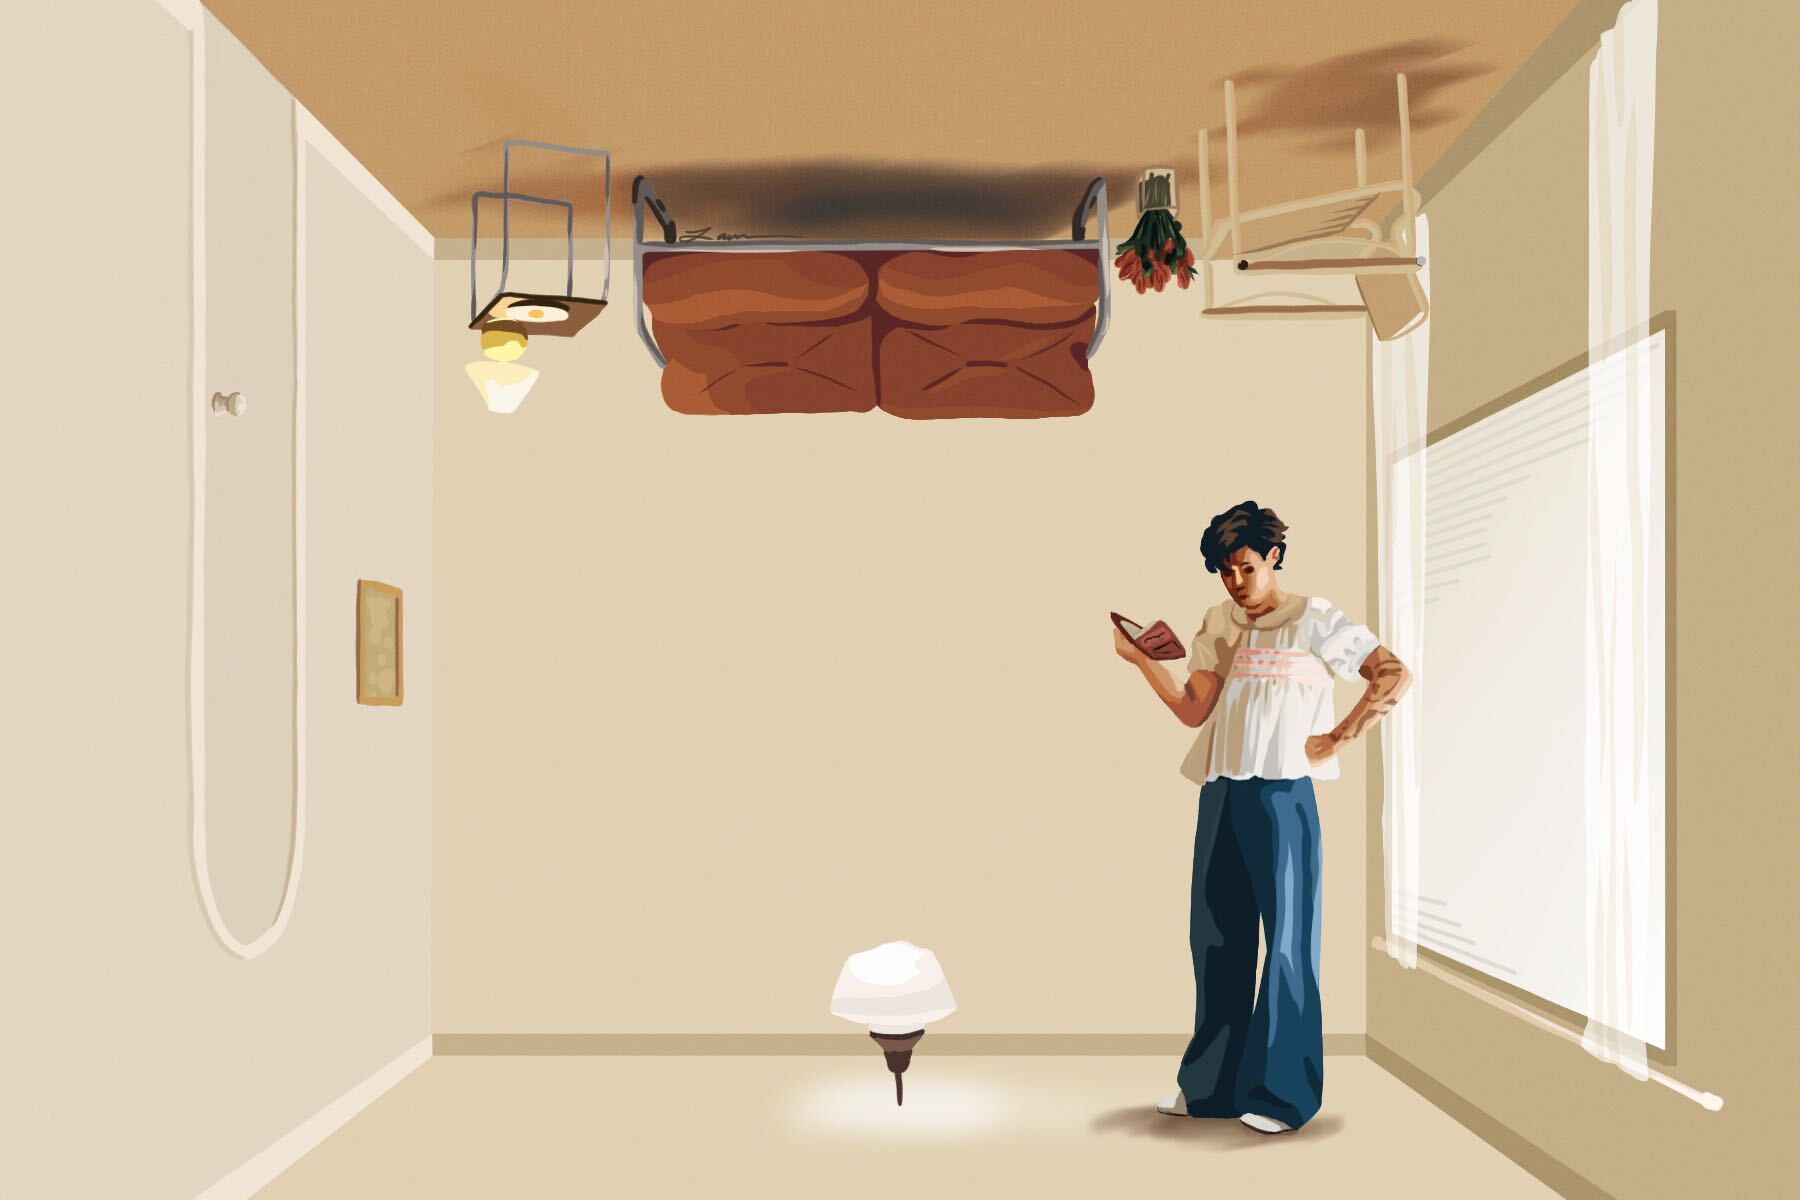 An illustration of the Harry's House album cover.